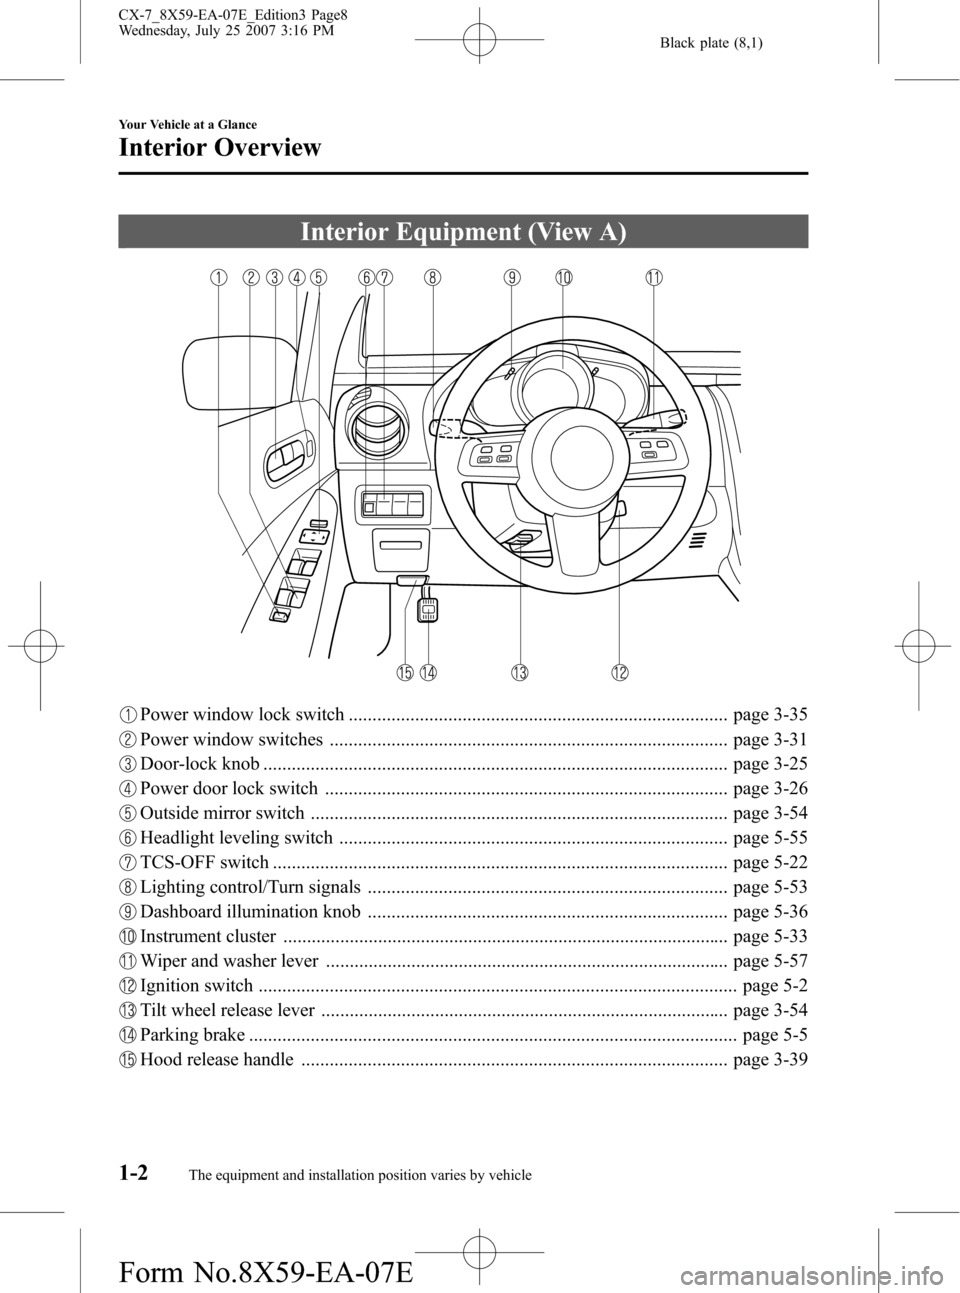 MAZDA MODEL CX-7 2008  Owners Manual (in English) Black plate (8,1)
Interior Equipment (View A)
Power window lock switch ................................................................................ page 3-35
Power window switches ................